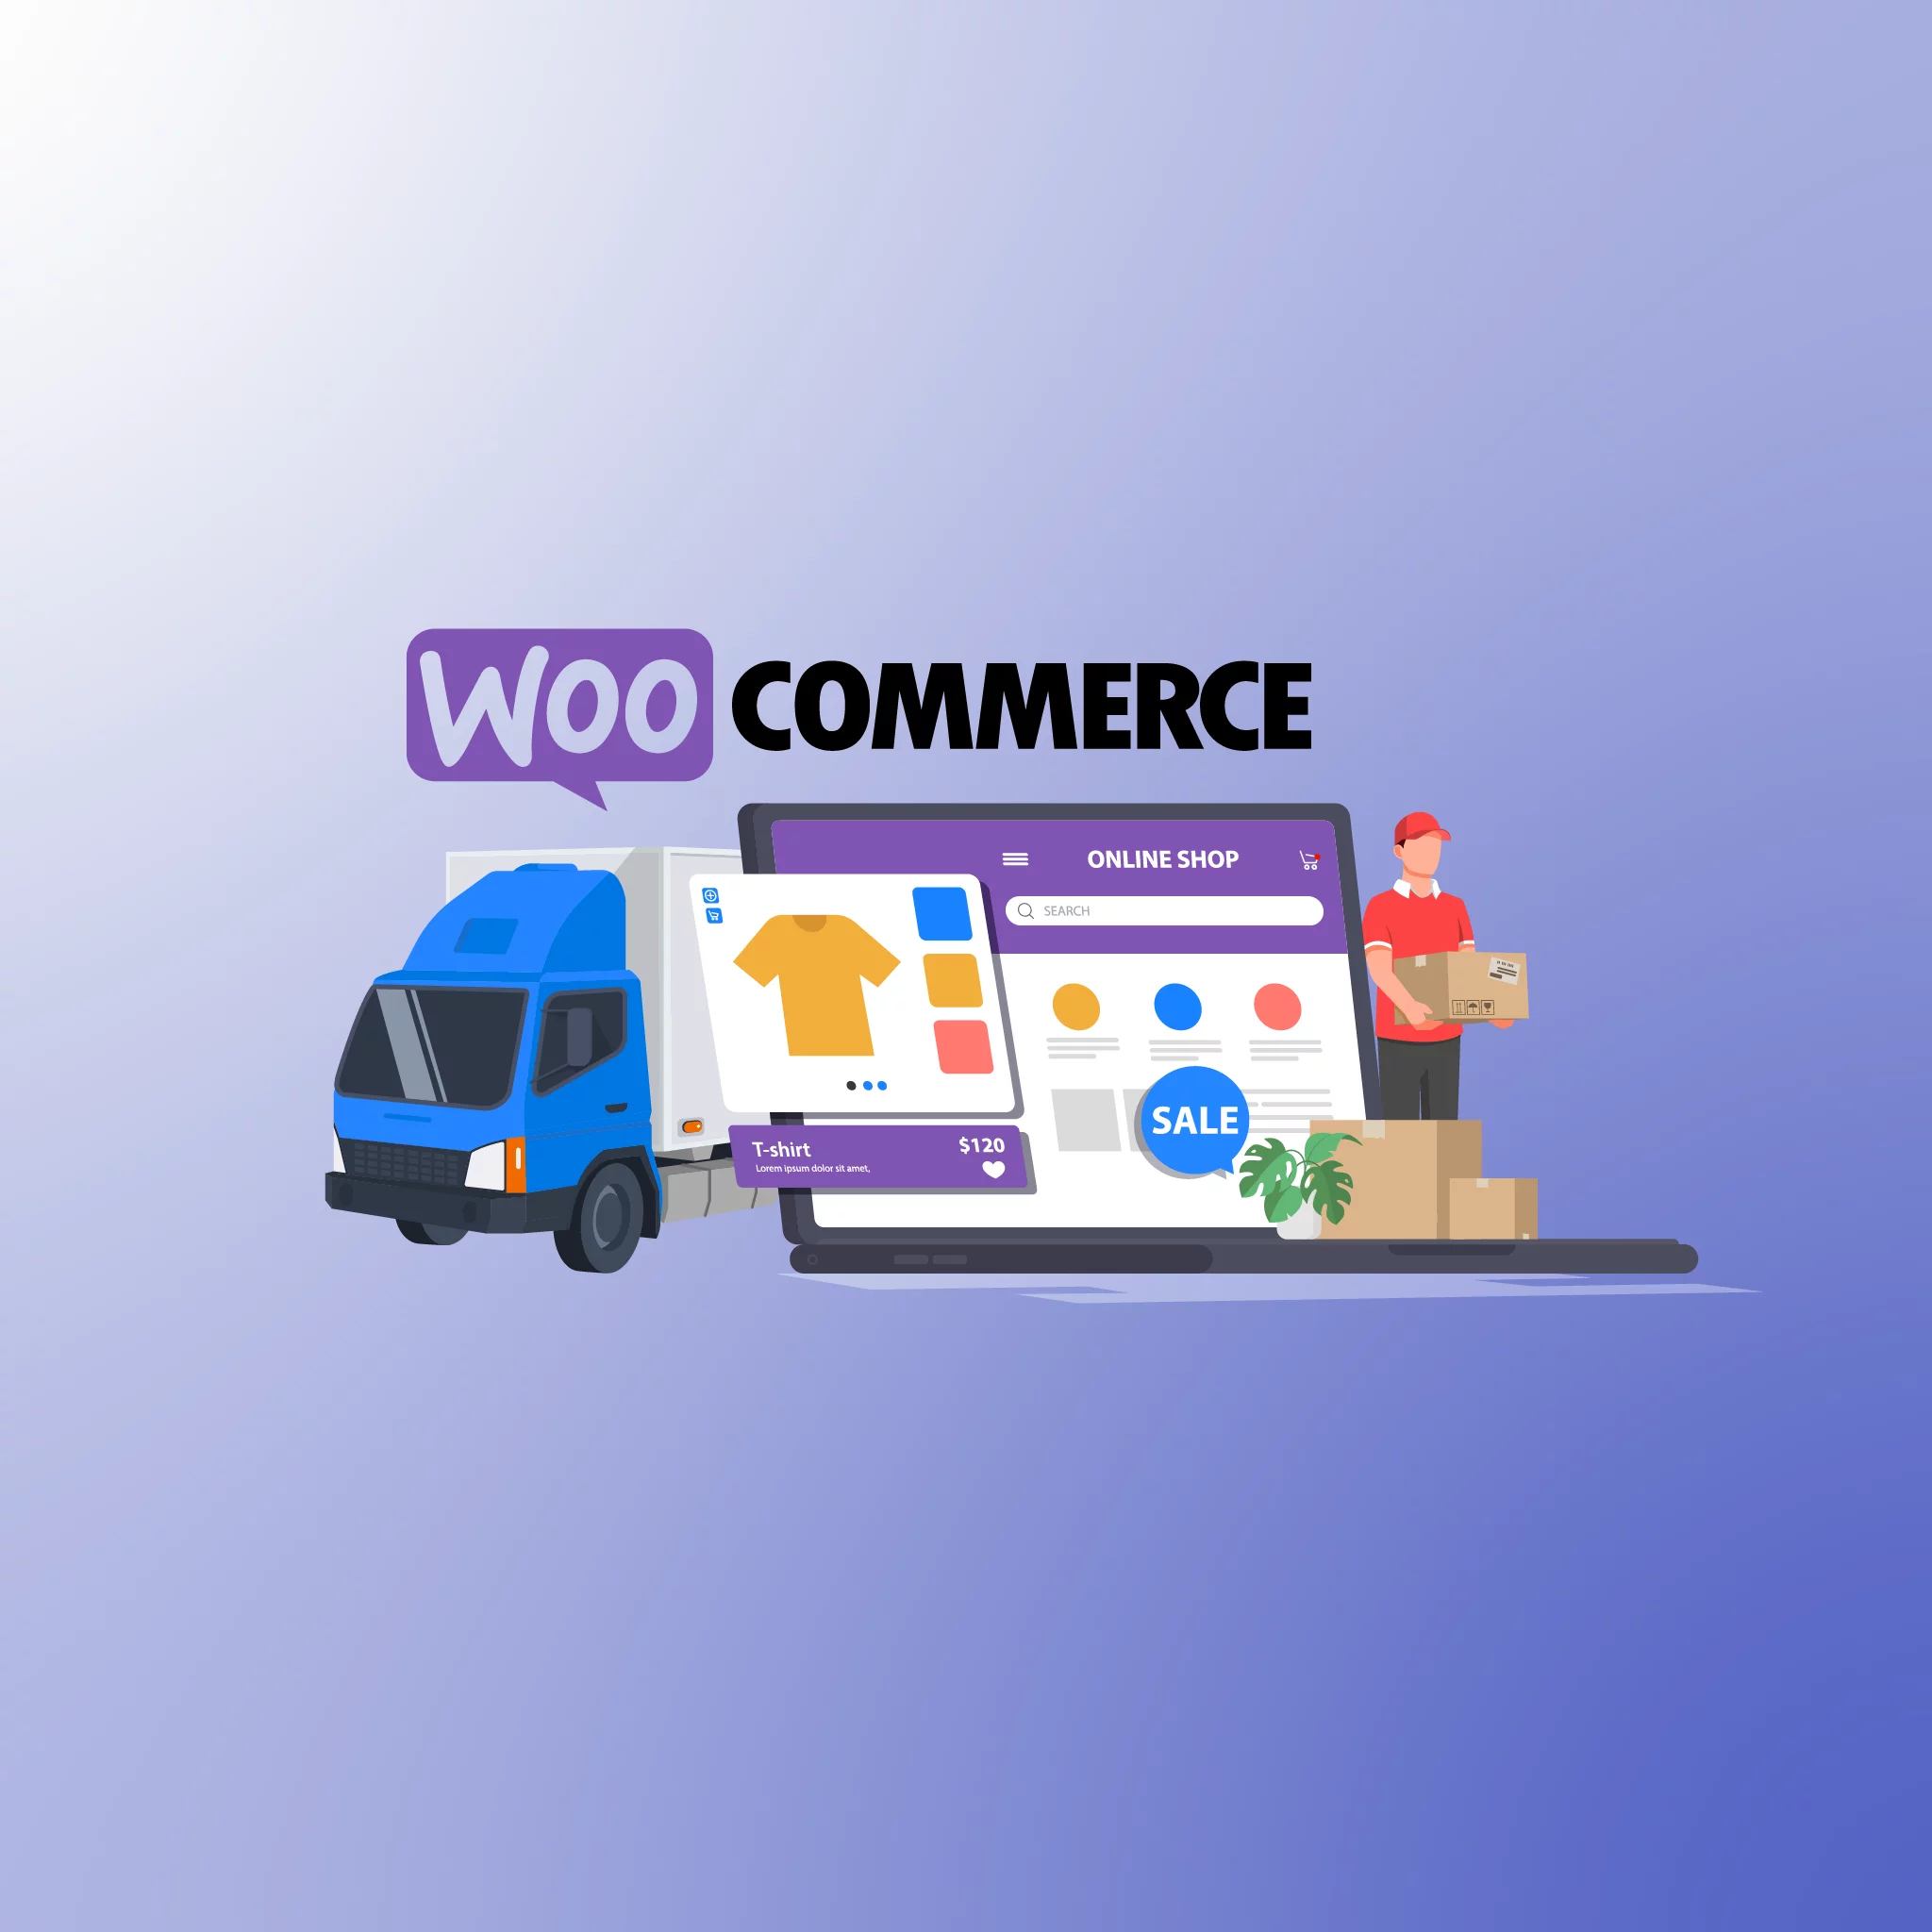 Shipping Plugins for WooCommerce: Delivery truck, courier, and online order confirmation on laptop screen